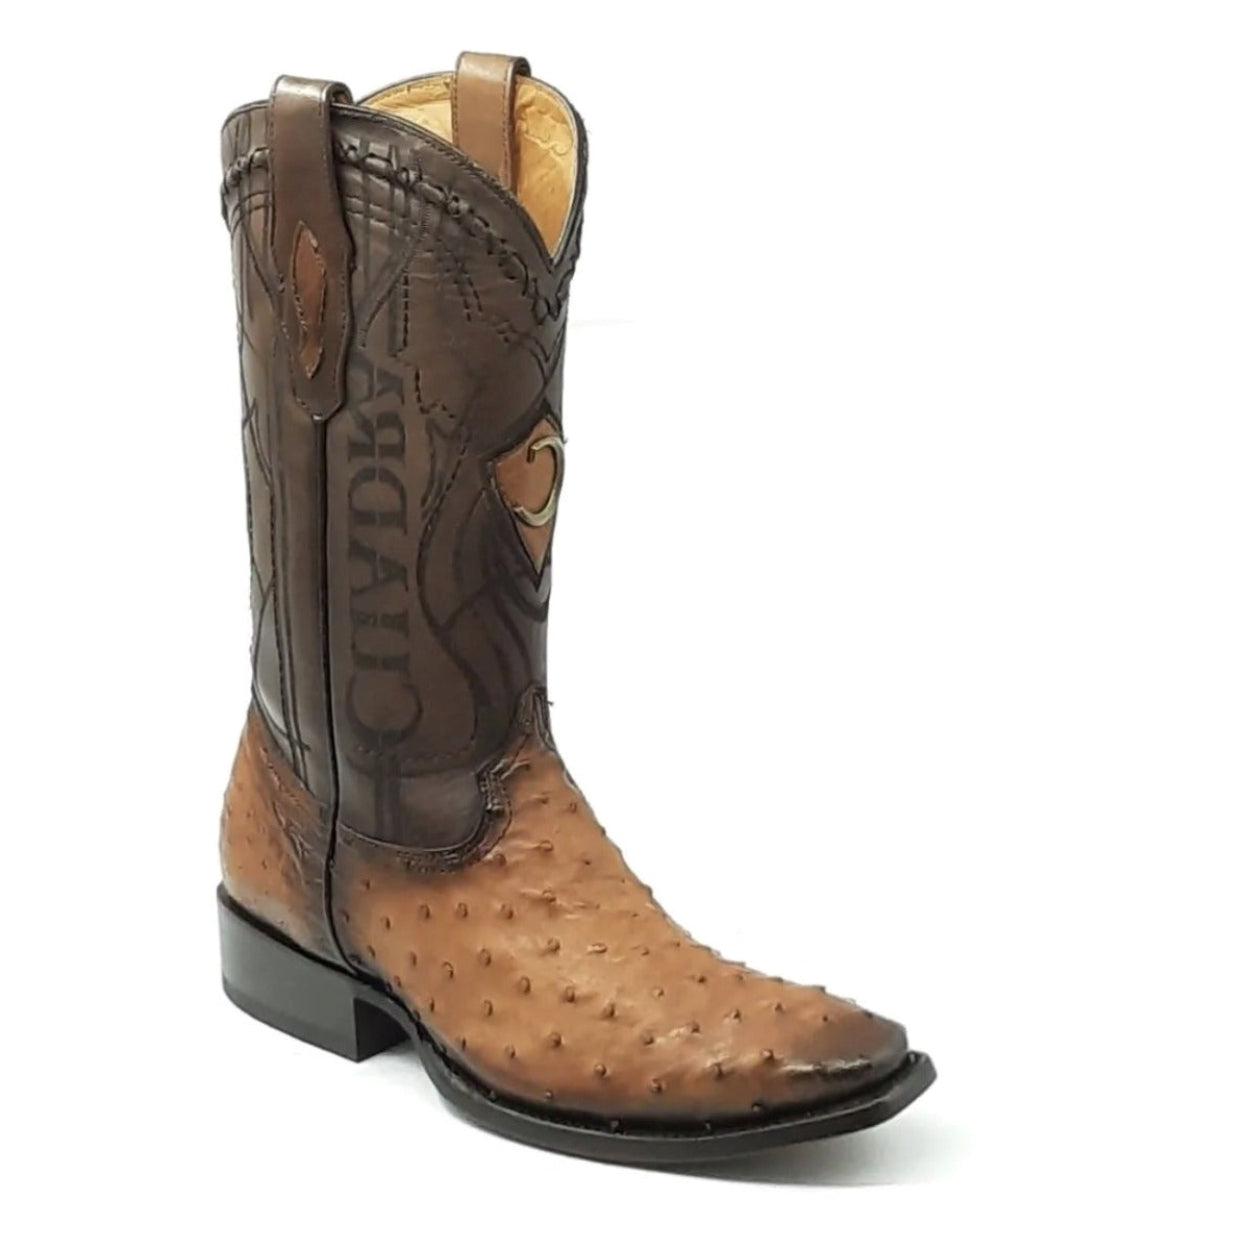 3C1NA1 - Cuadra brandy dress cowboy exotic ostrich leather boots for men-Kuet.us